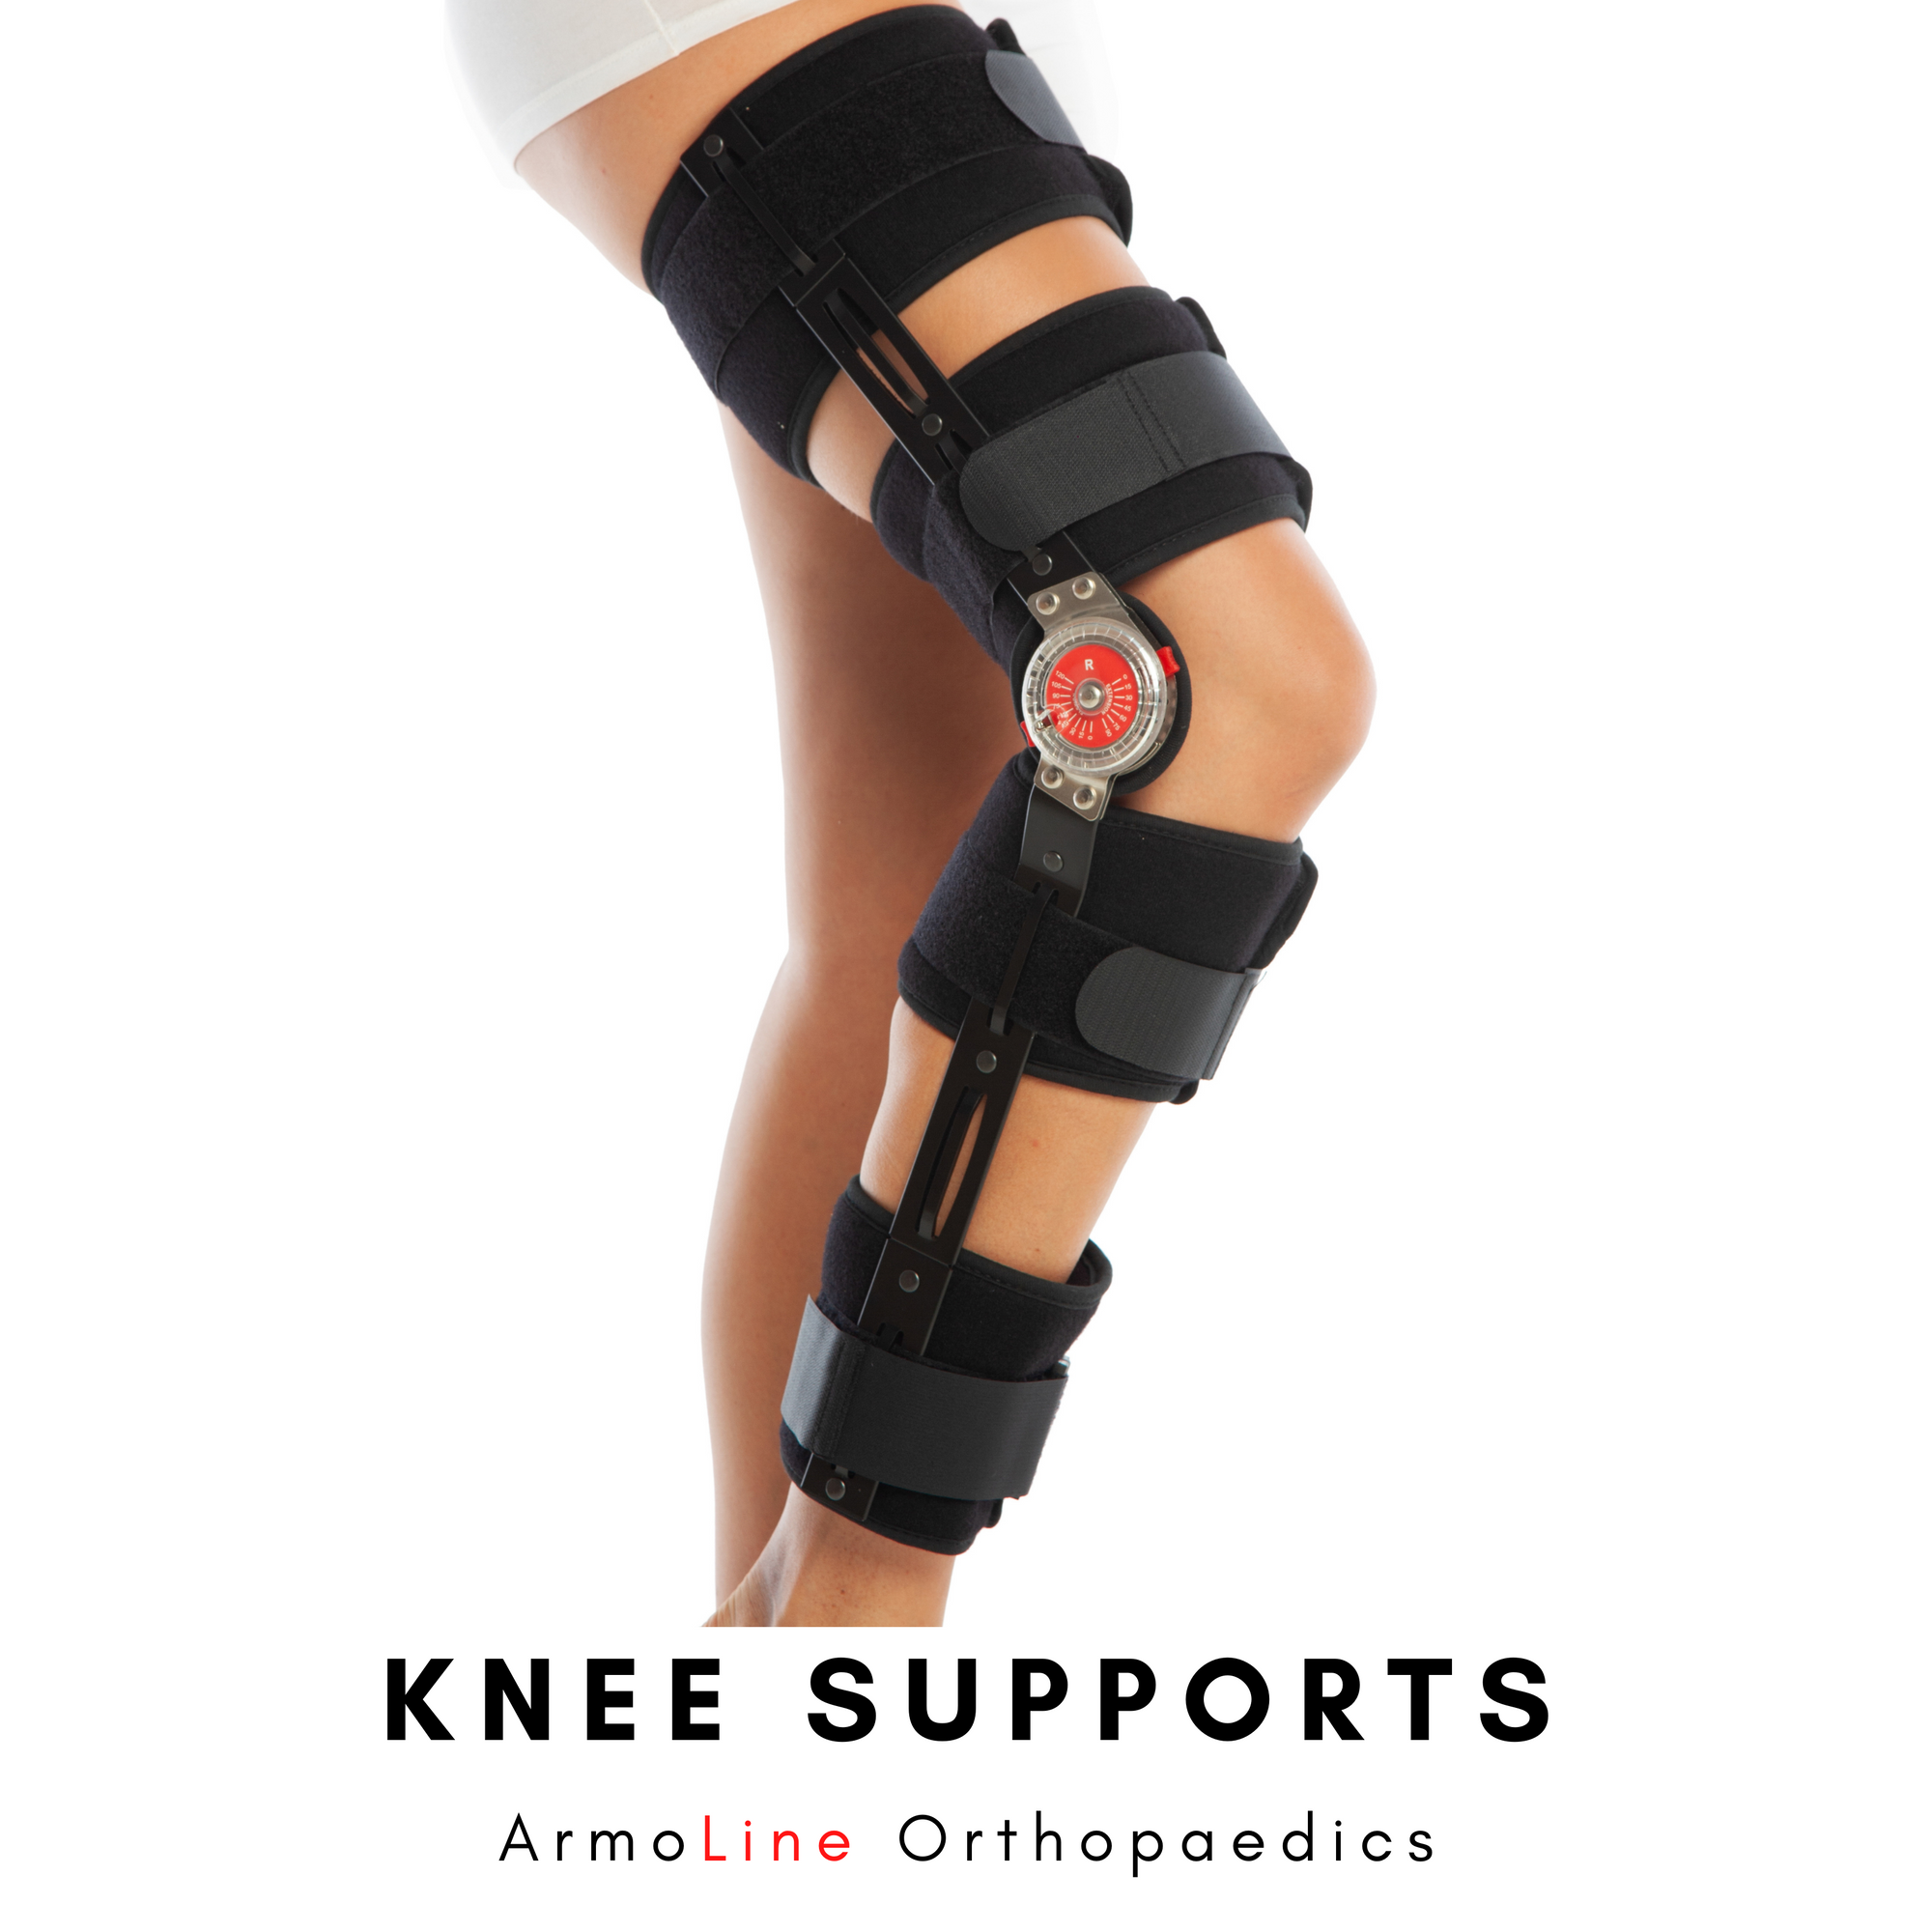 ArmoLine Knee Supports Collection Page Link Photo. ArmoLine ROM Knee Brace is worn by the model